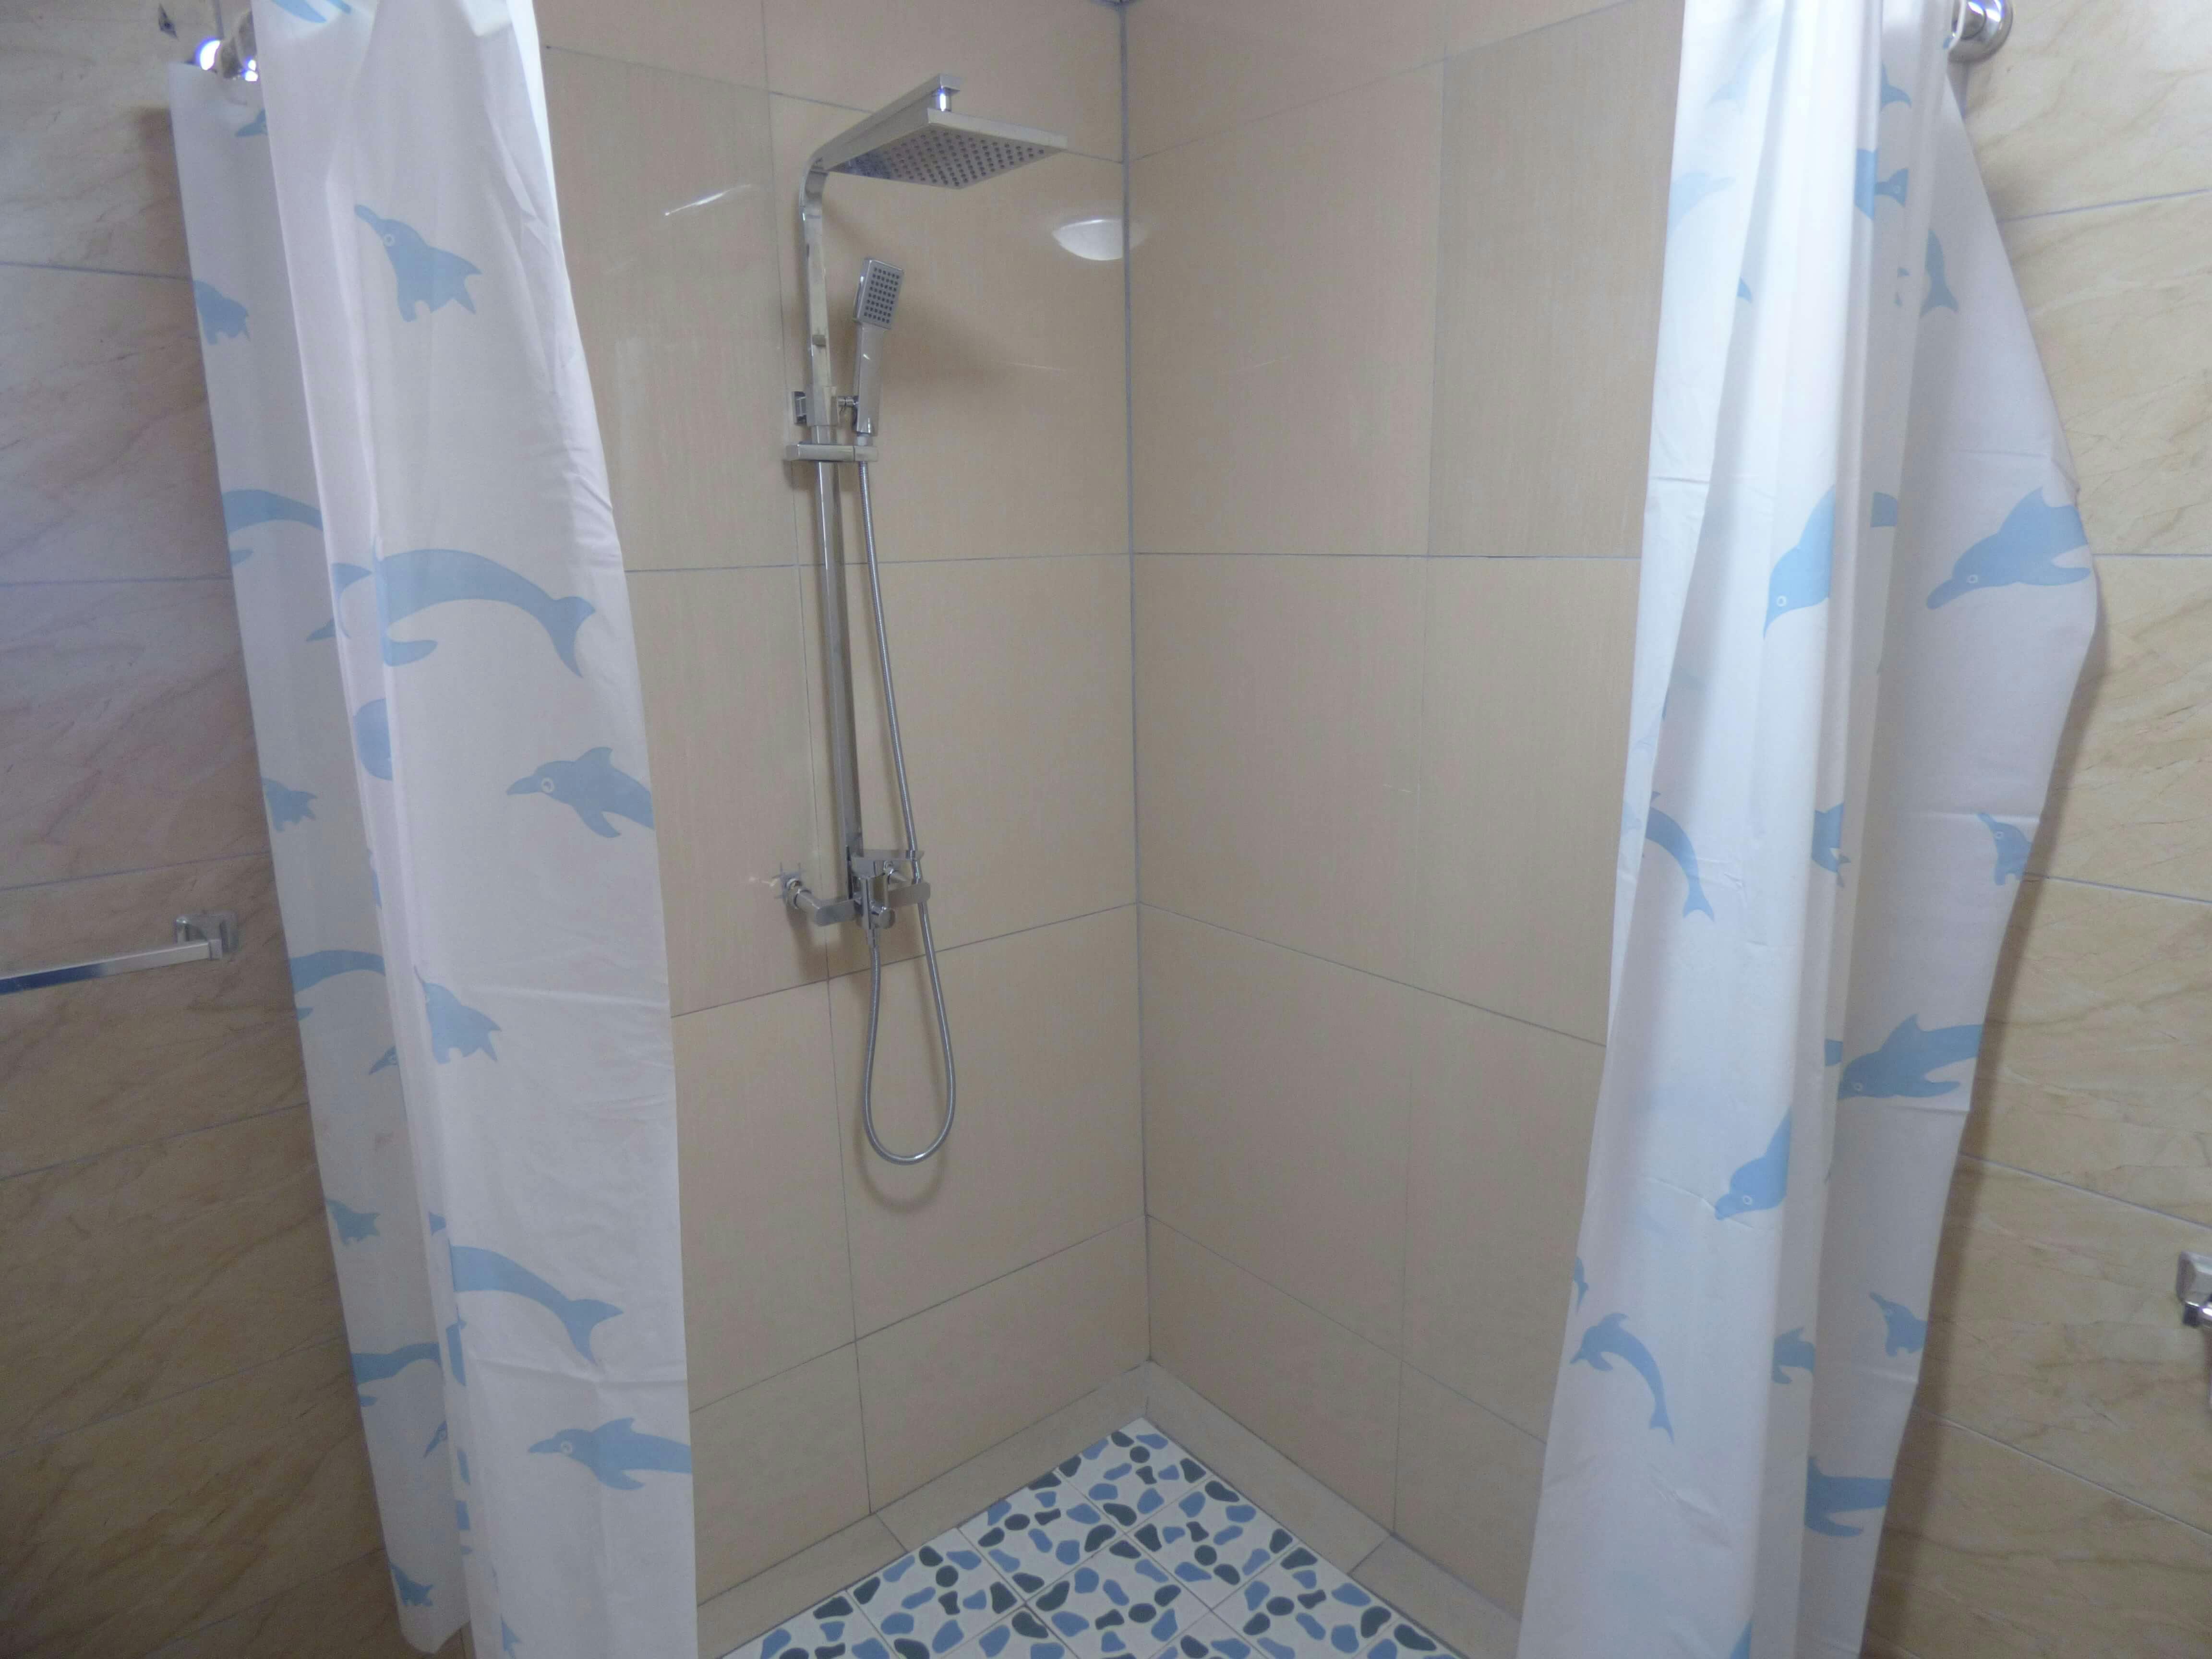 En-suite bathrom and toilet in Villas at Level 2. Wheel Chair capable